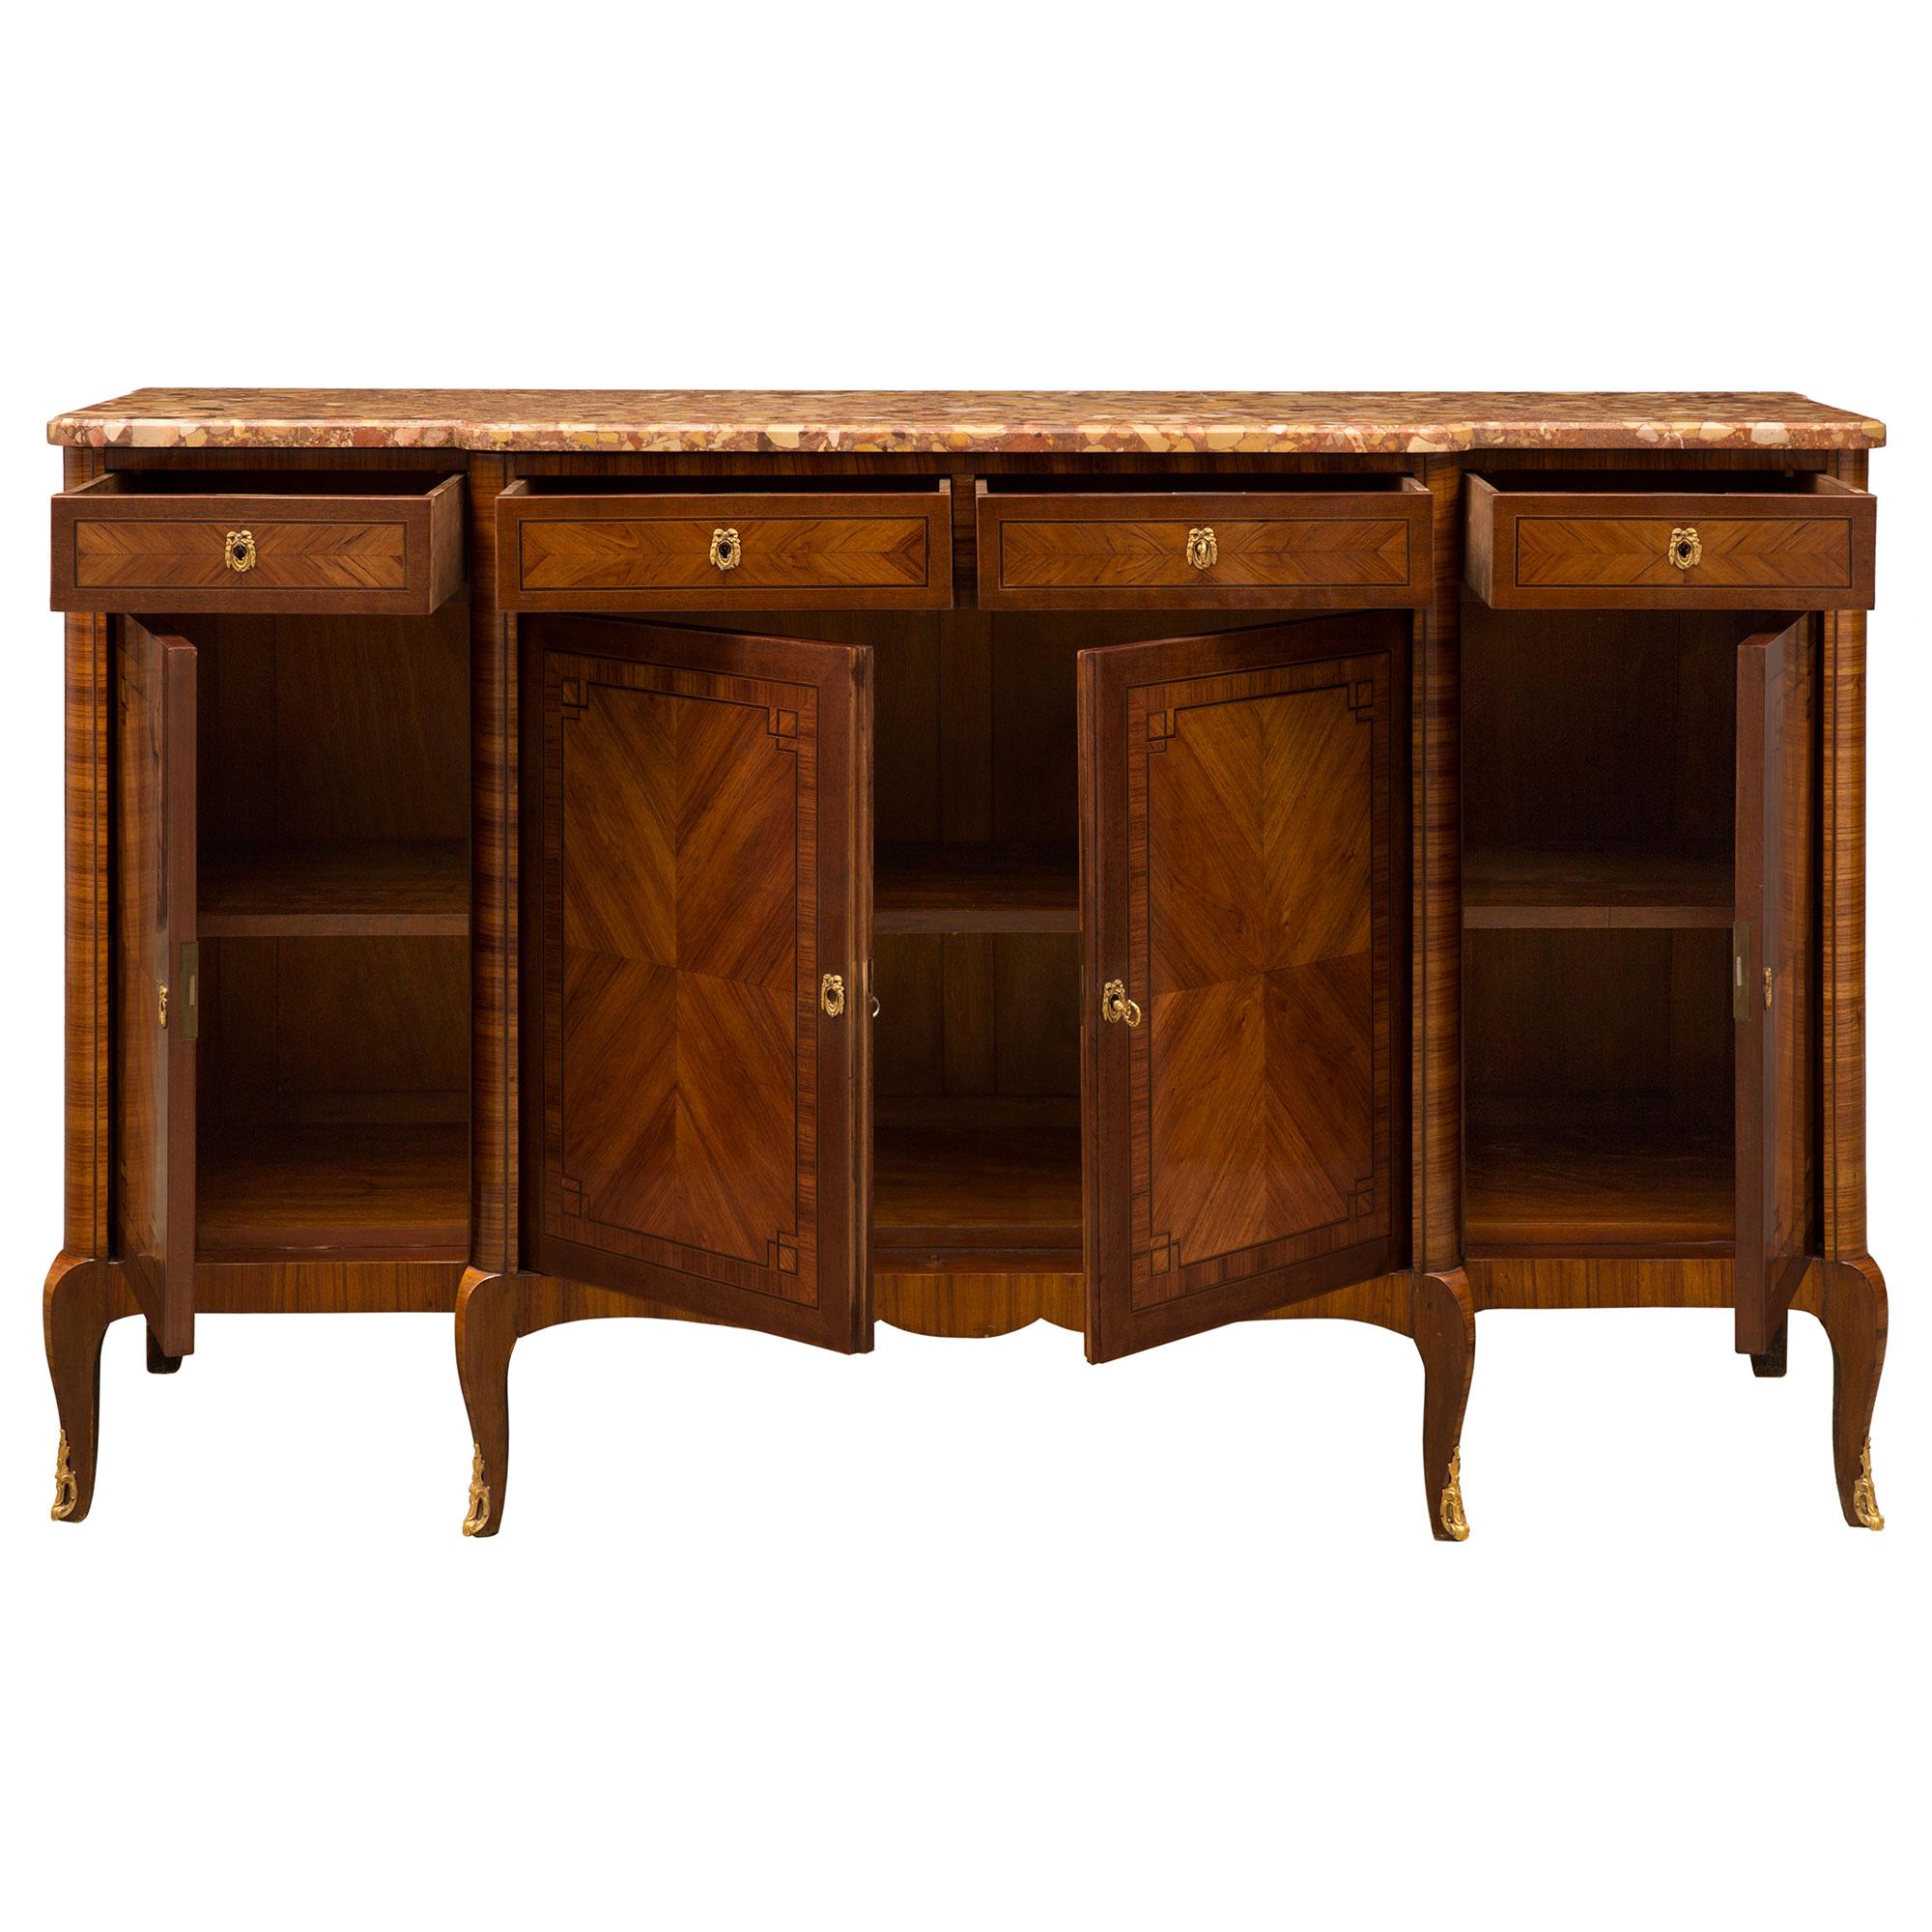 French 19th Century Transitional Style Tulipwood, Kingwood and Marble Buffet In Good Condition For Sale In West Palm Beach, FL